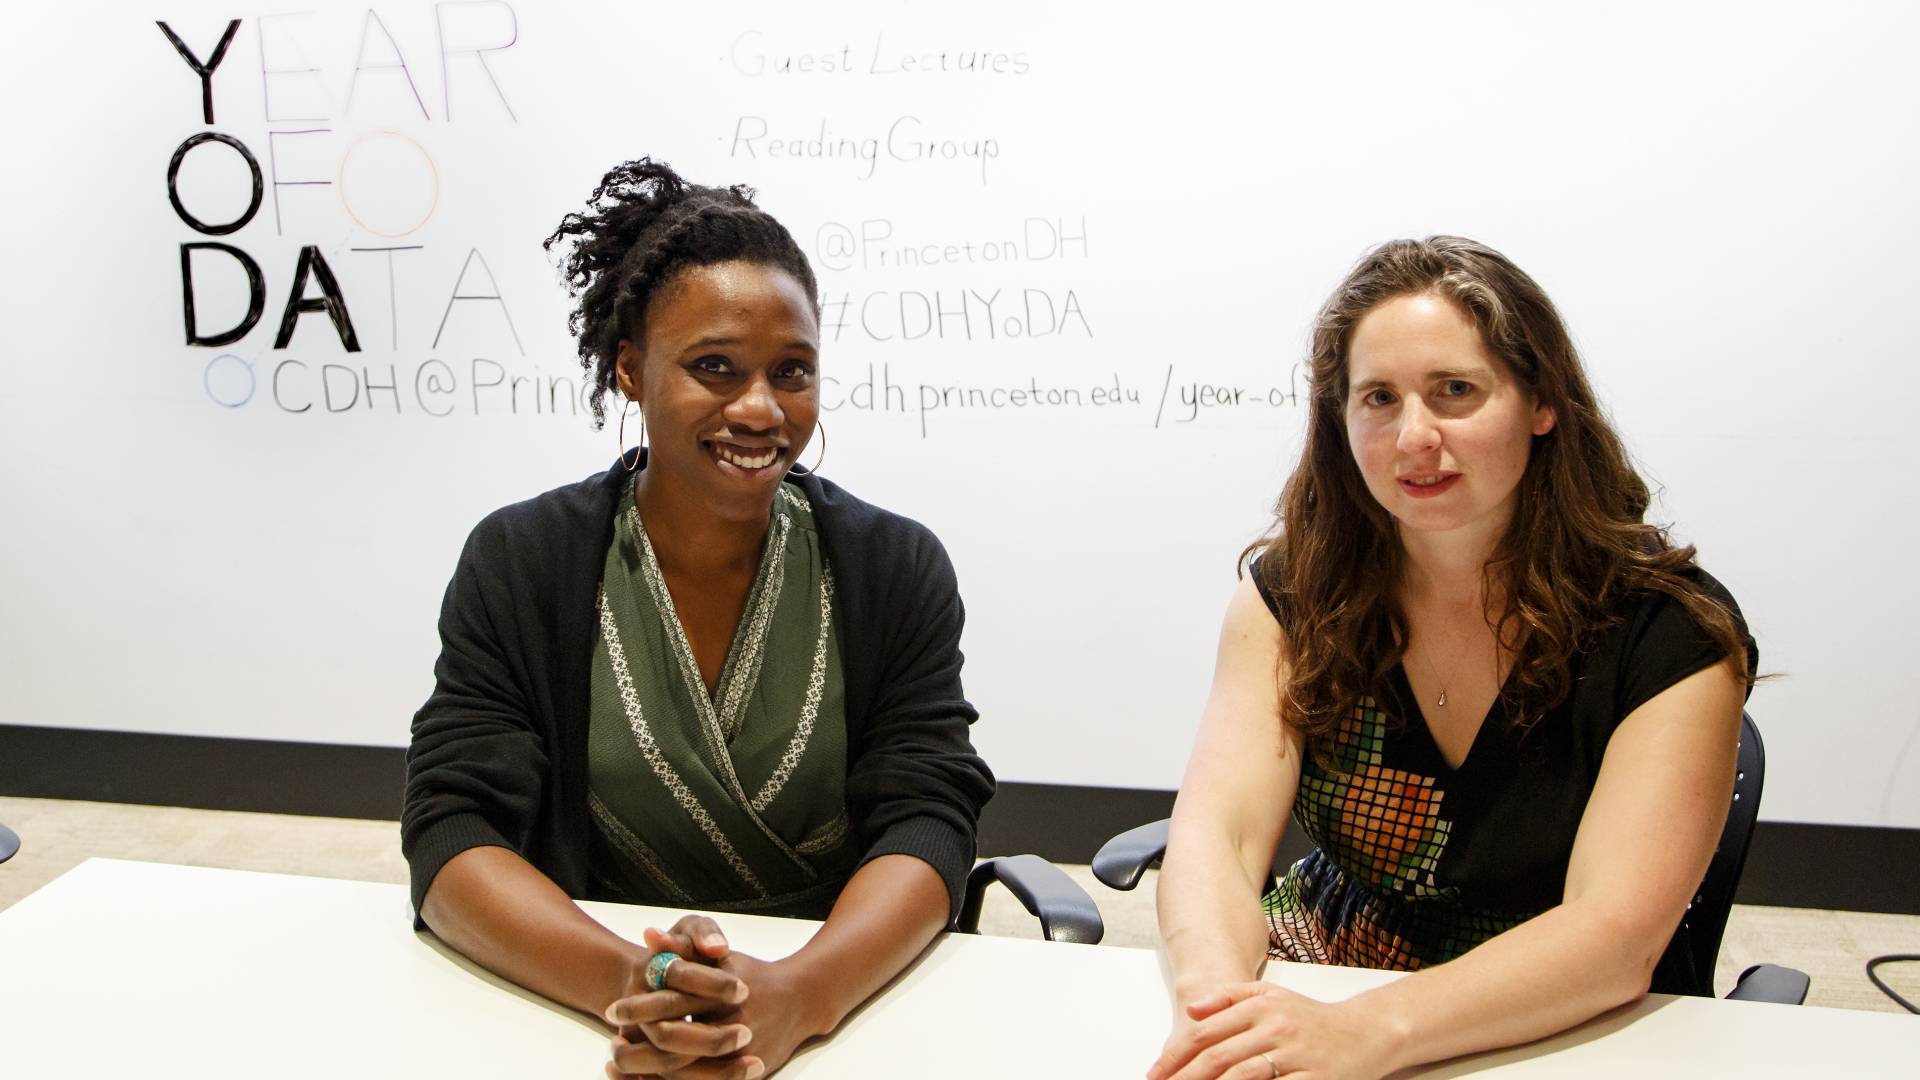 Mimi Onuoha (left) and Lauren Klein sit at table with "Year of Data " on white board behind them